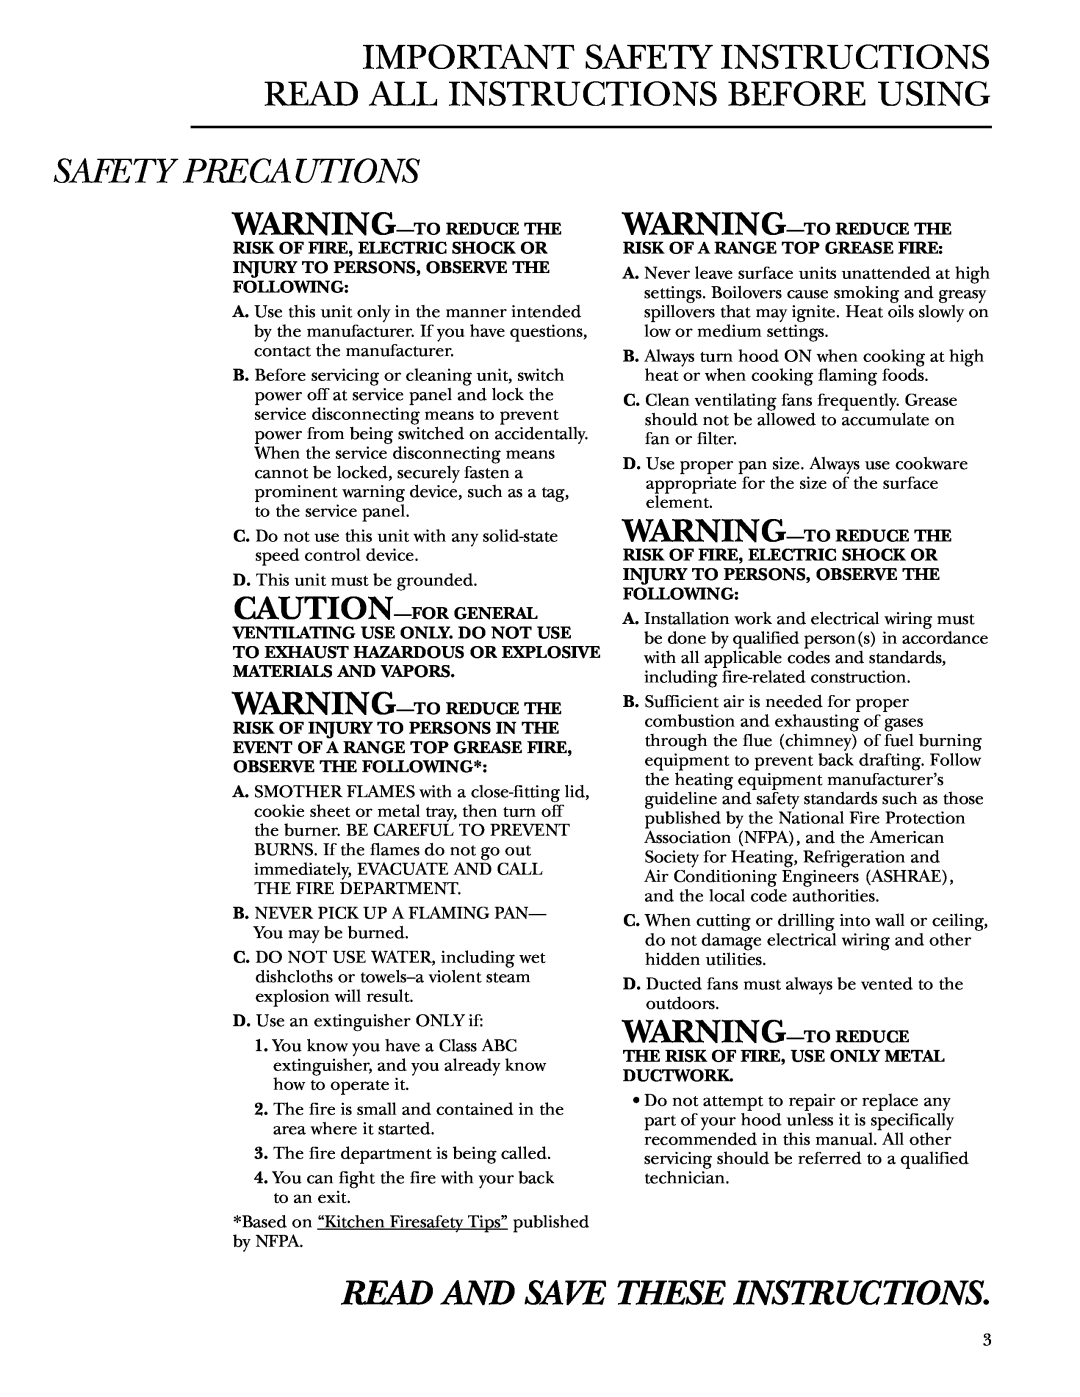 GE Monogram ZV36, ZV48, ZV30 Important Safety Instructions Read All Instructions Before Using, Safety Precautions 